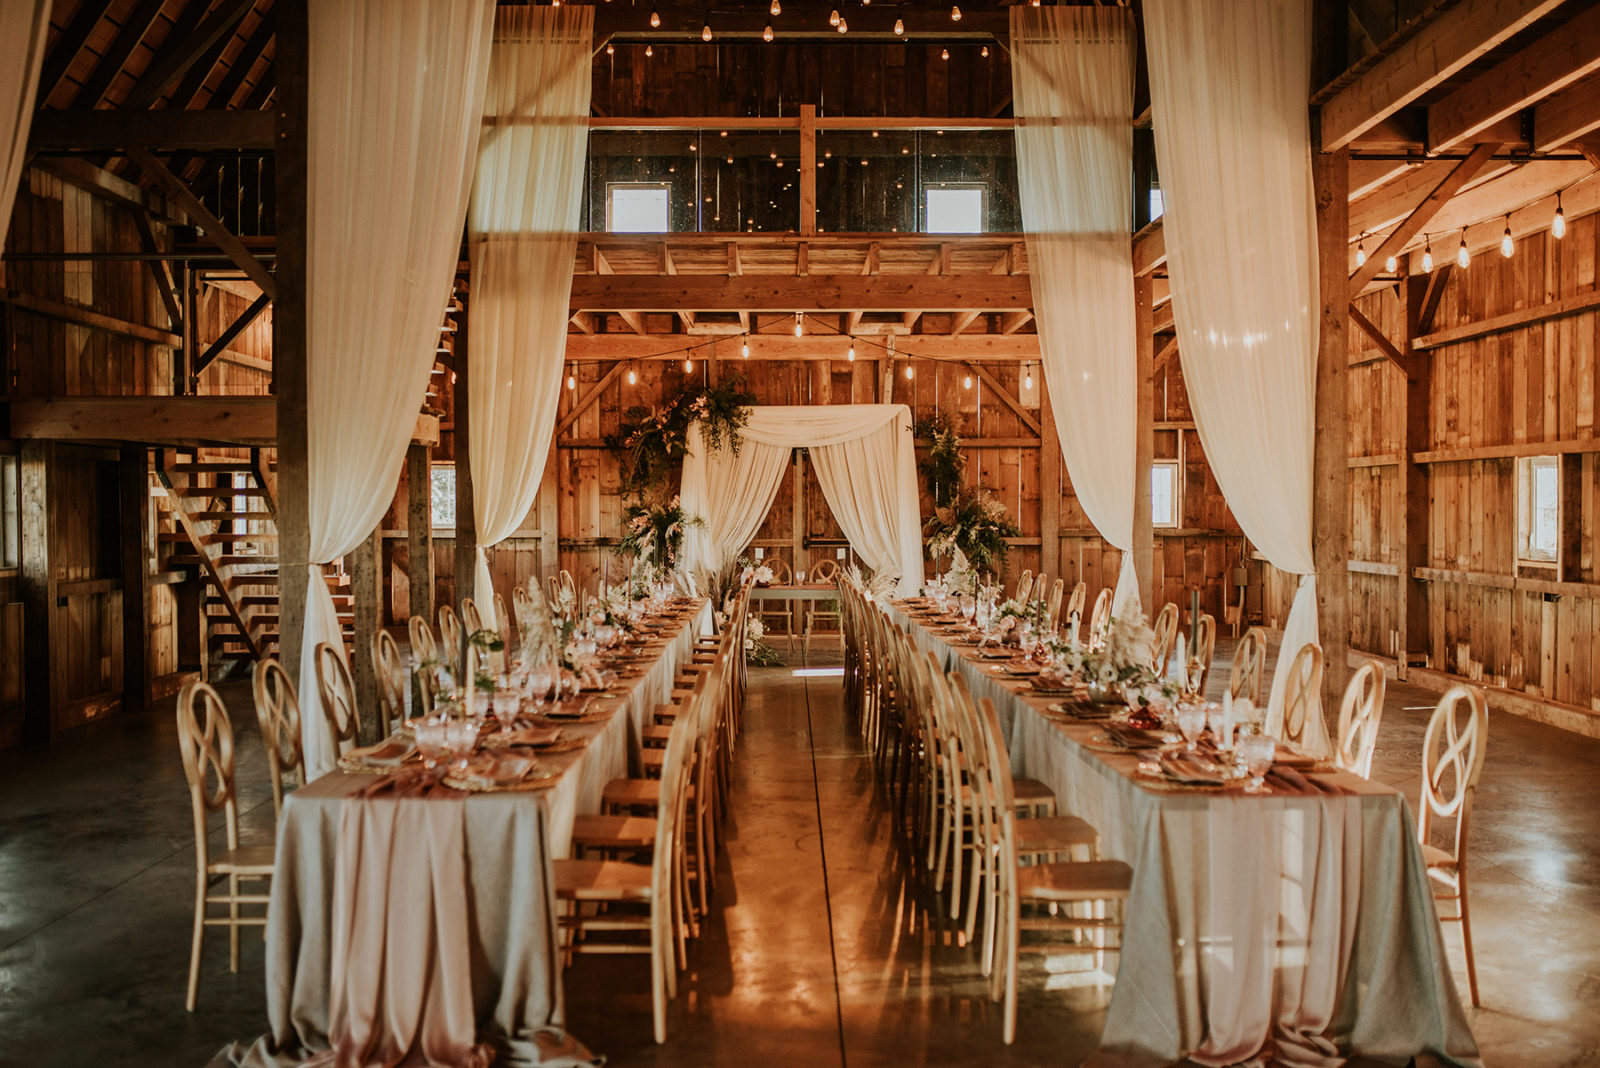 Vintage Boho Meets Western Chic in This Countryside Barn Wedding Inspiration